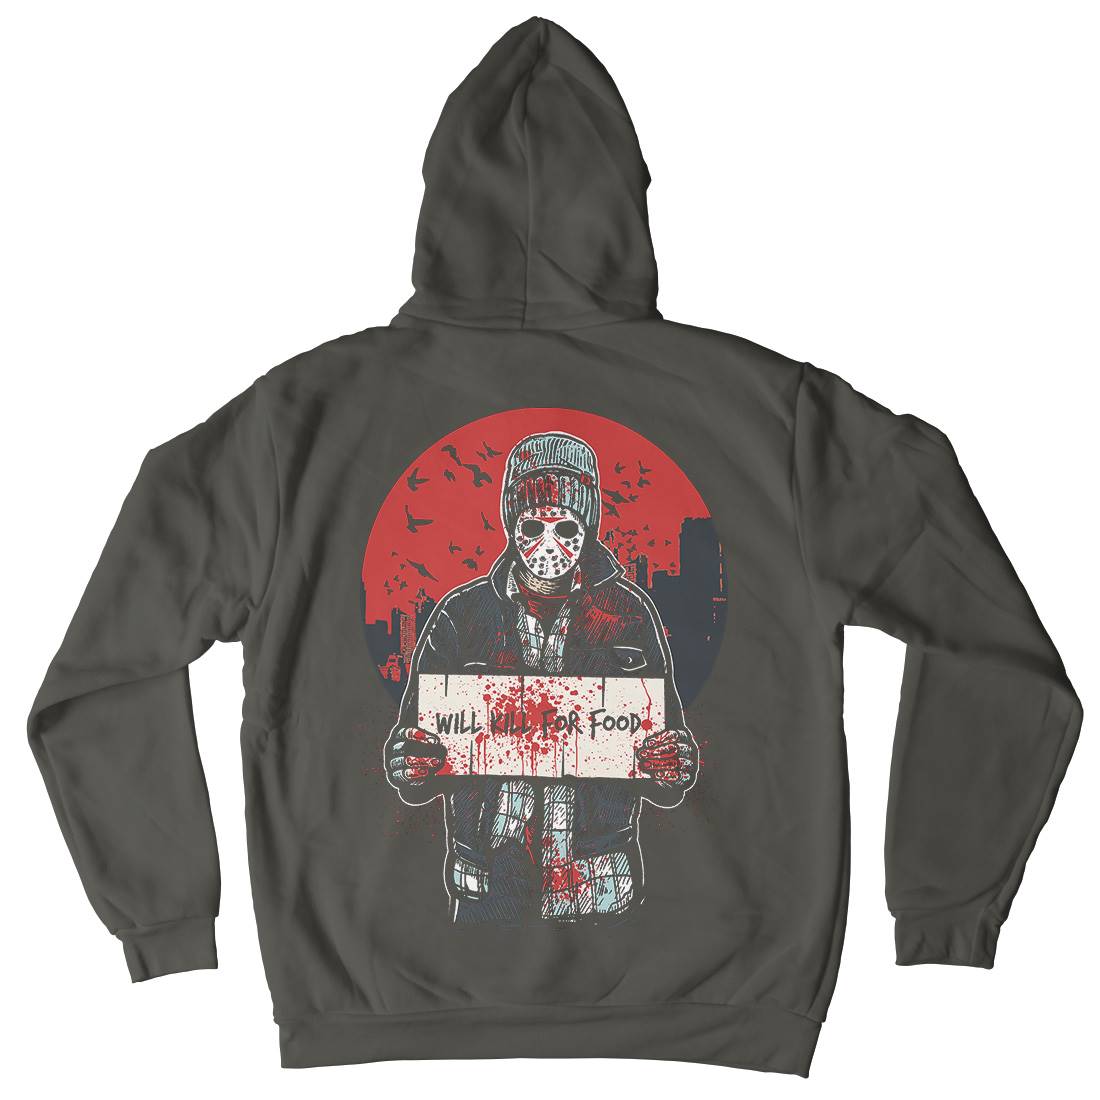 Kill For Food Kids Crew Neck Hoodie Horror A549